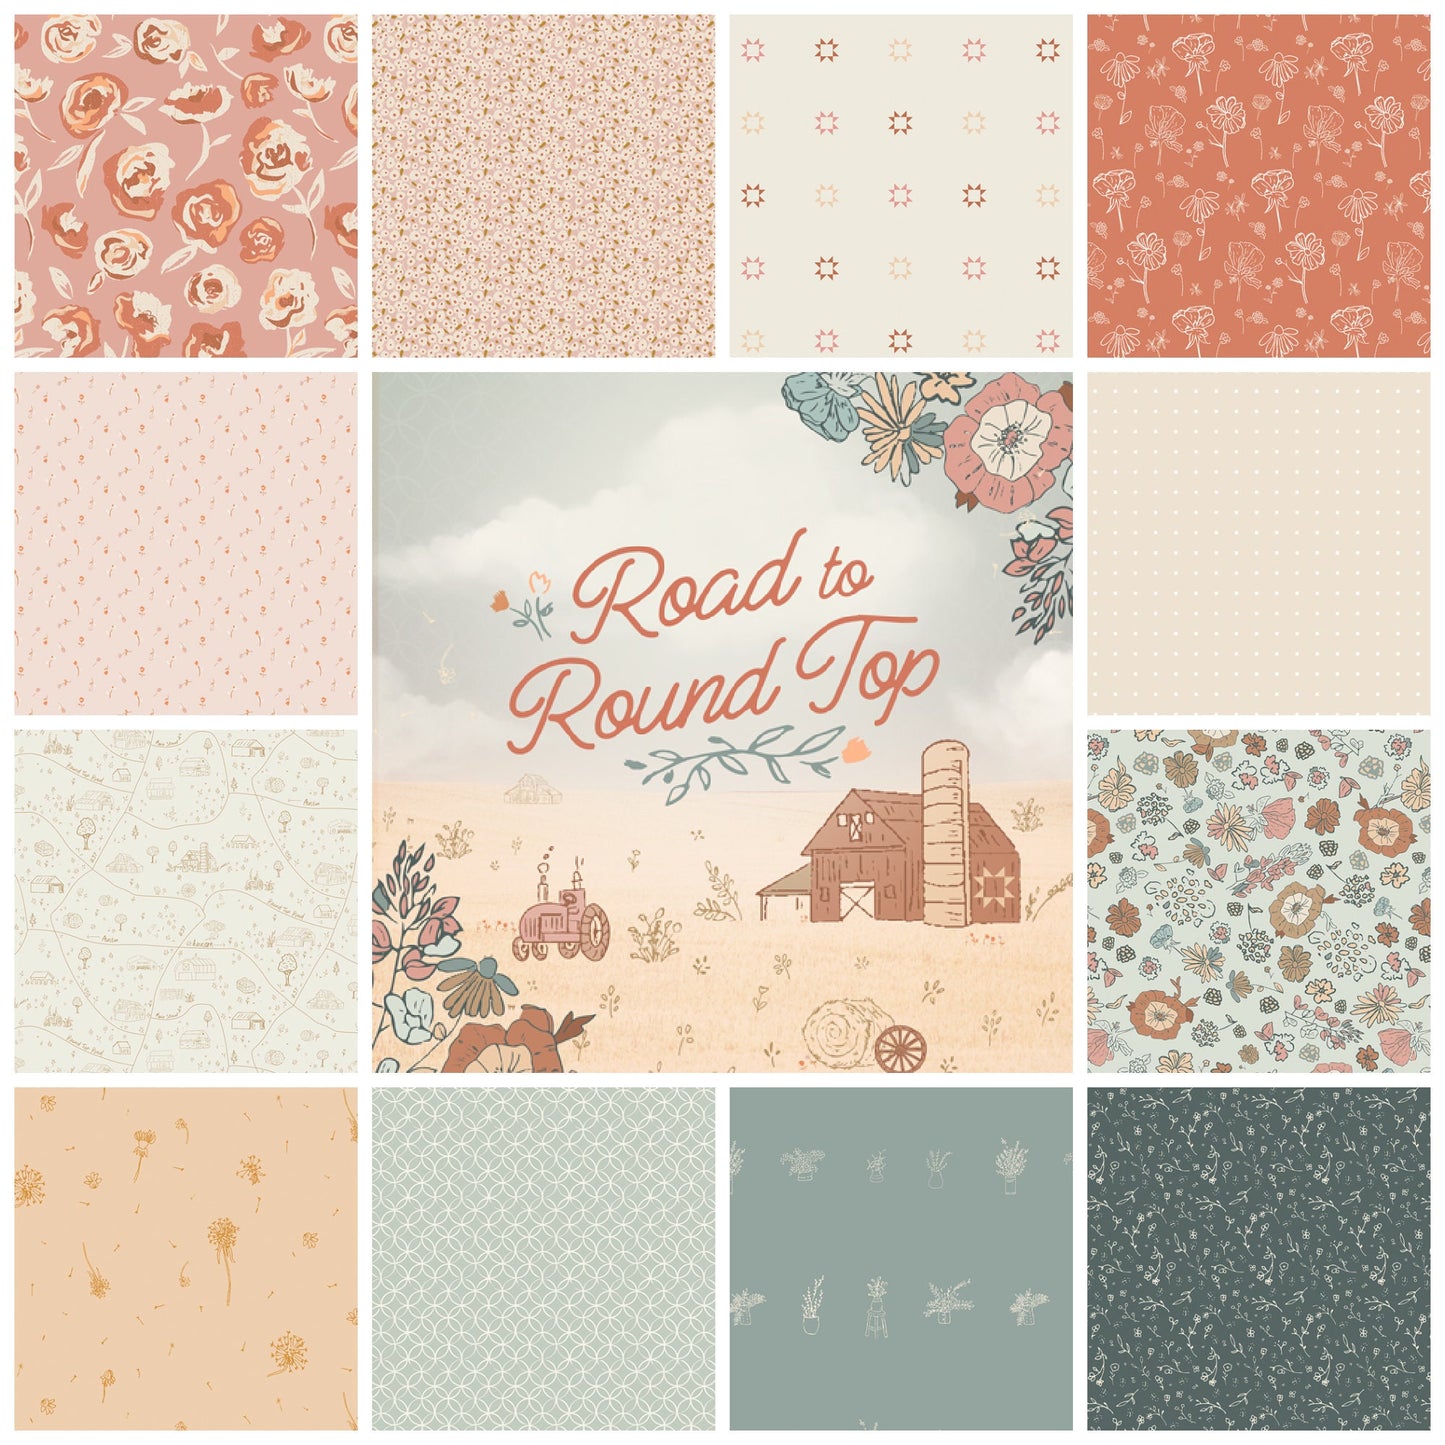 Road to Round Top - Make A Wish Print - by Elizabeth Chappell for Art Gallery Fabrics